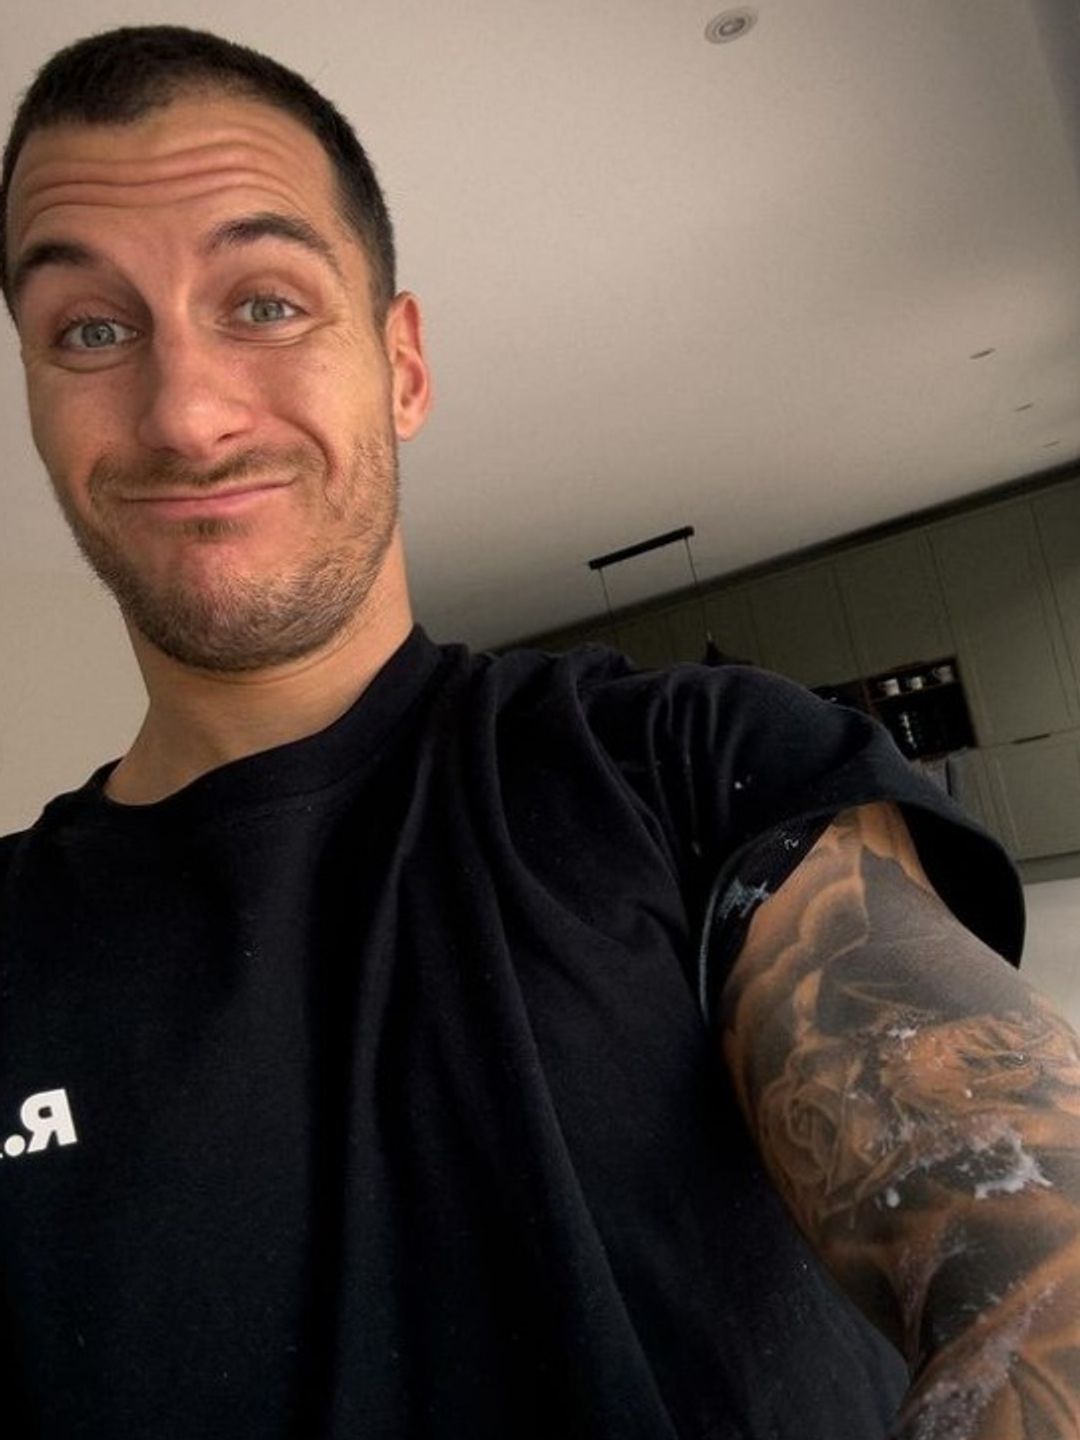 Gorka Marquez shows his arm covered in baby sick